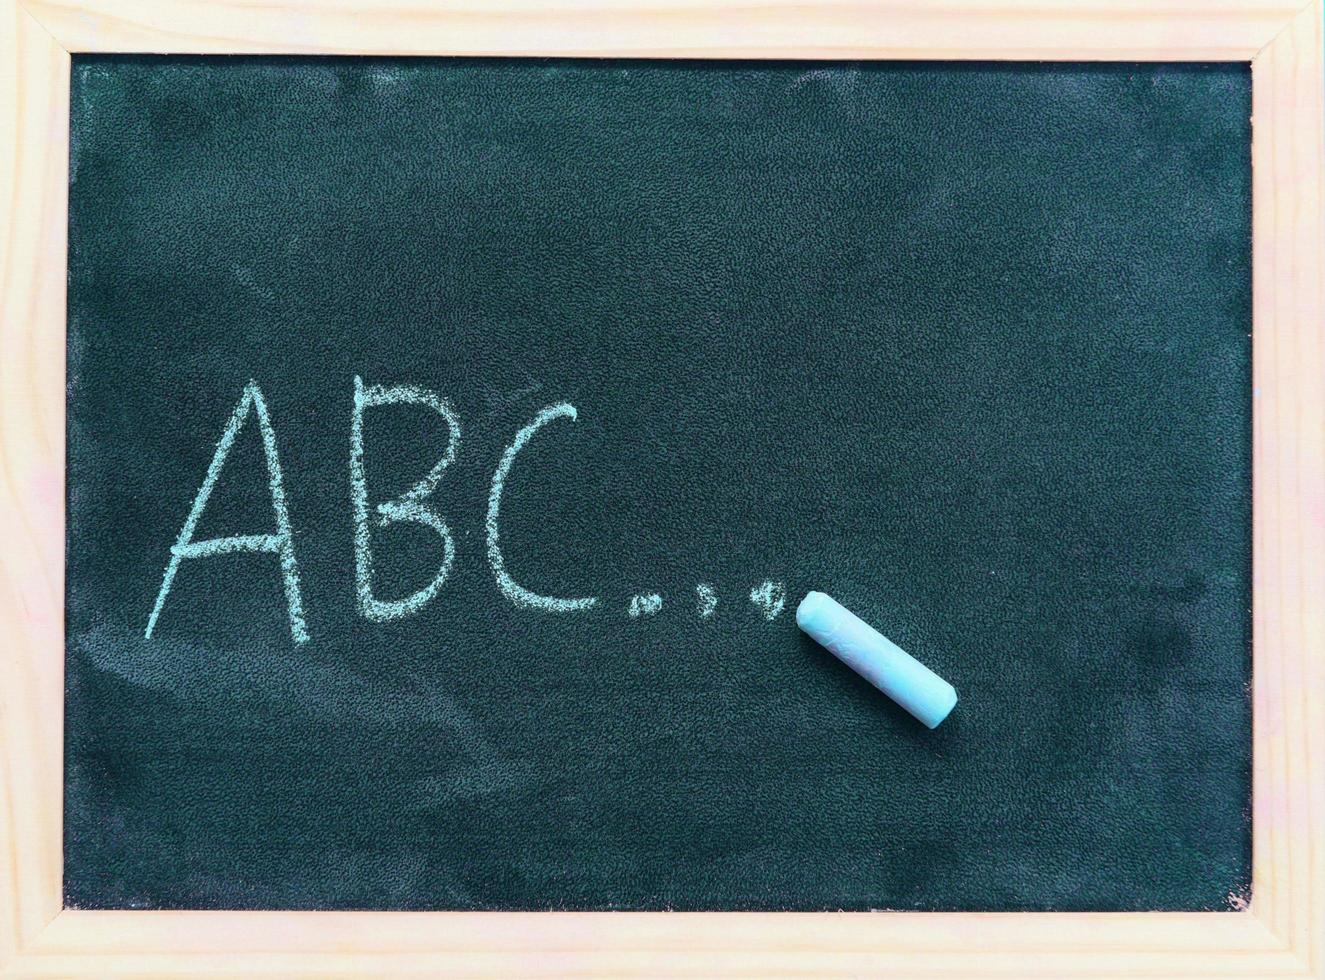 Blackboard dark or chalkboard with horizontal and banner blackboard texture chalk draw and write A B C for education in school chalkboard background photo